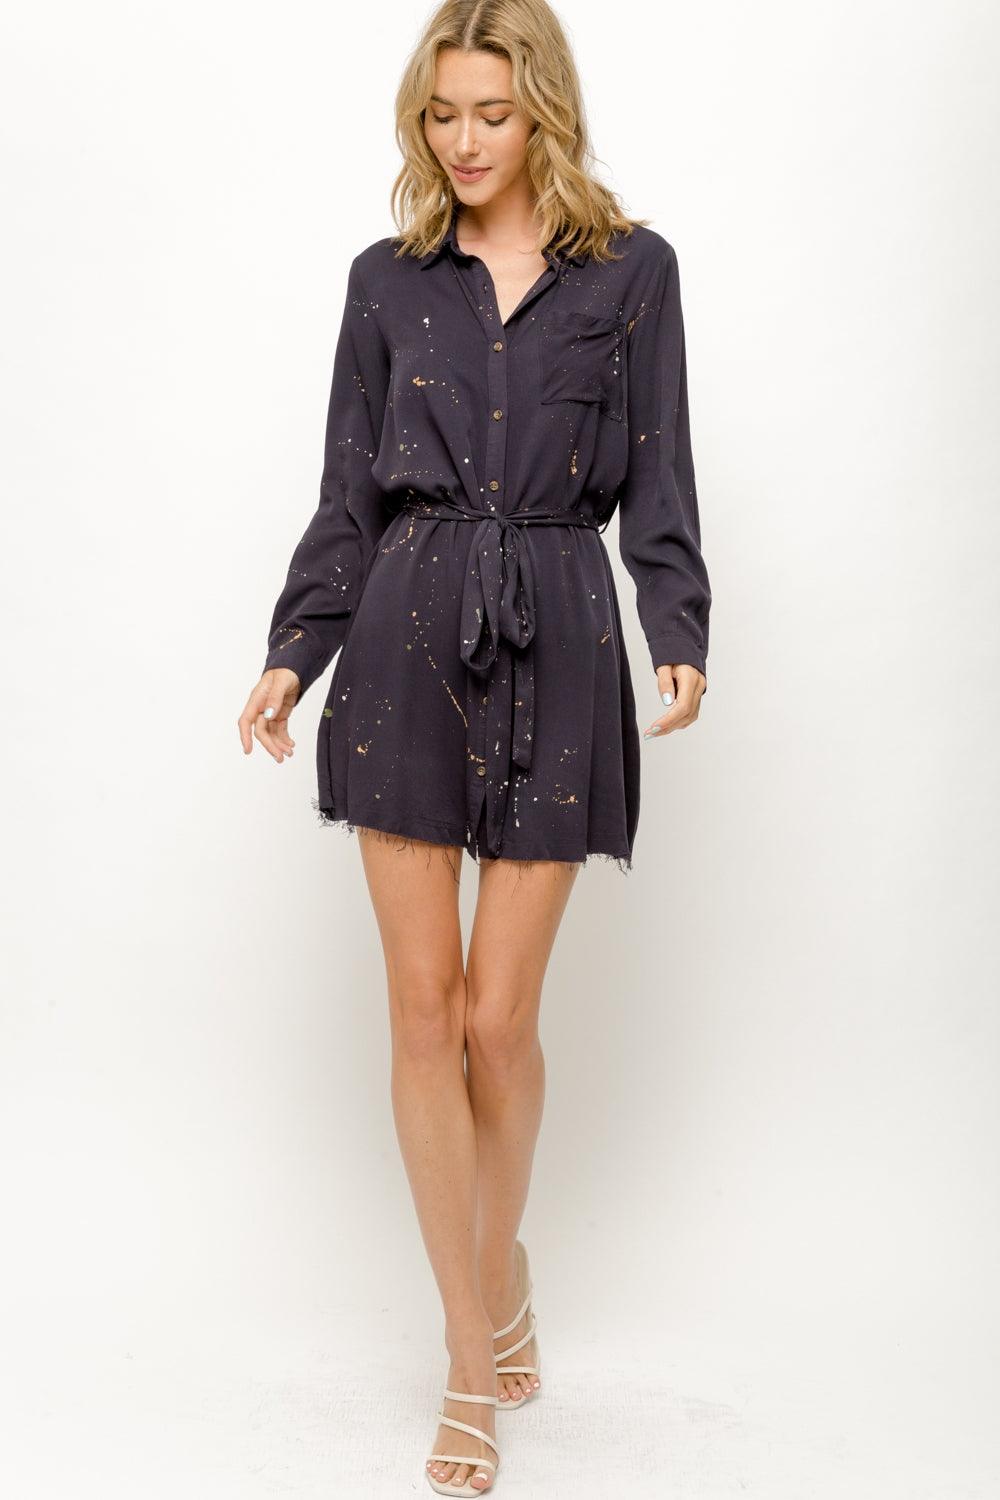 Black Paint Splash Shirt Dress with Fray Detail - Strawberry Moon Boutique